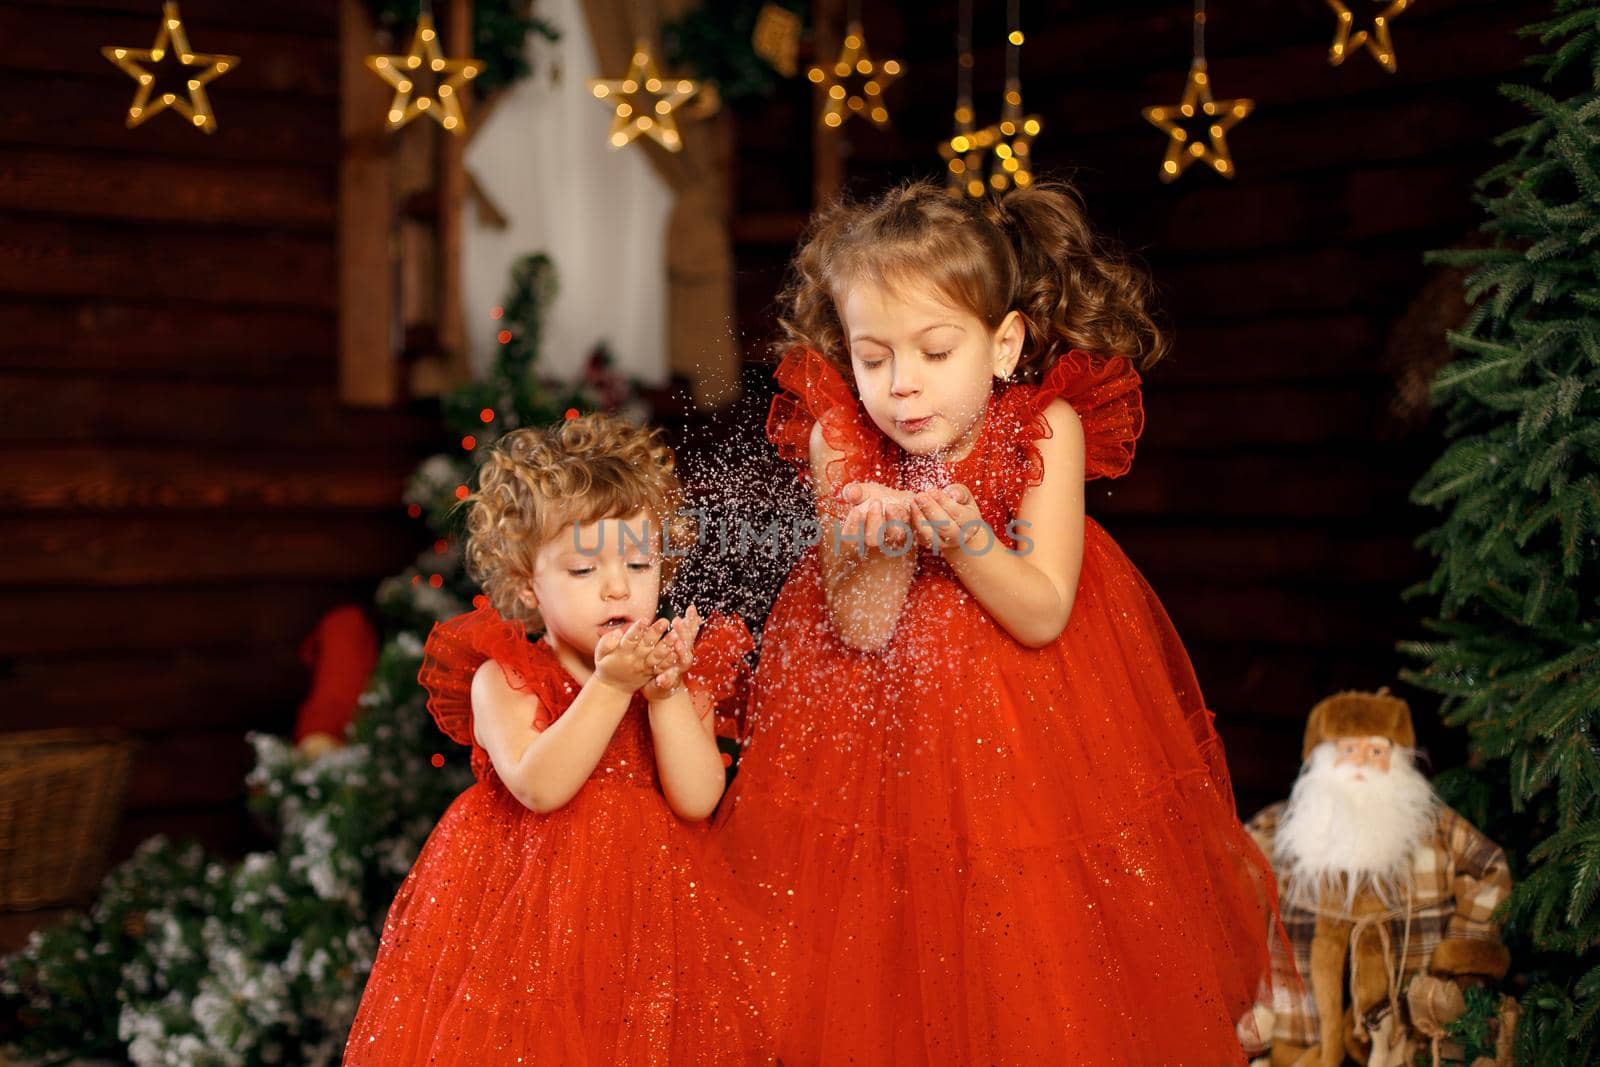 The child is excited about the Christmas holidays by throwing tinsel around by Try_my_best